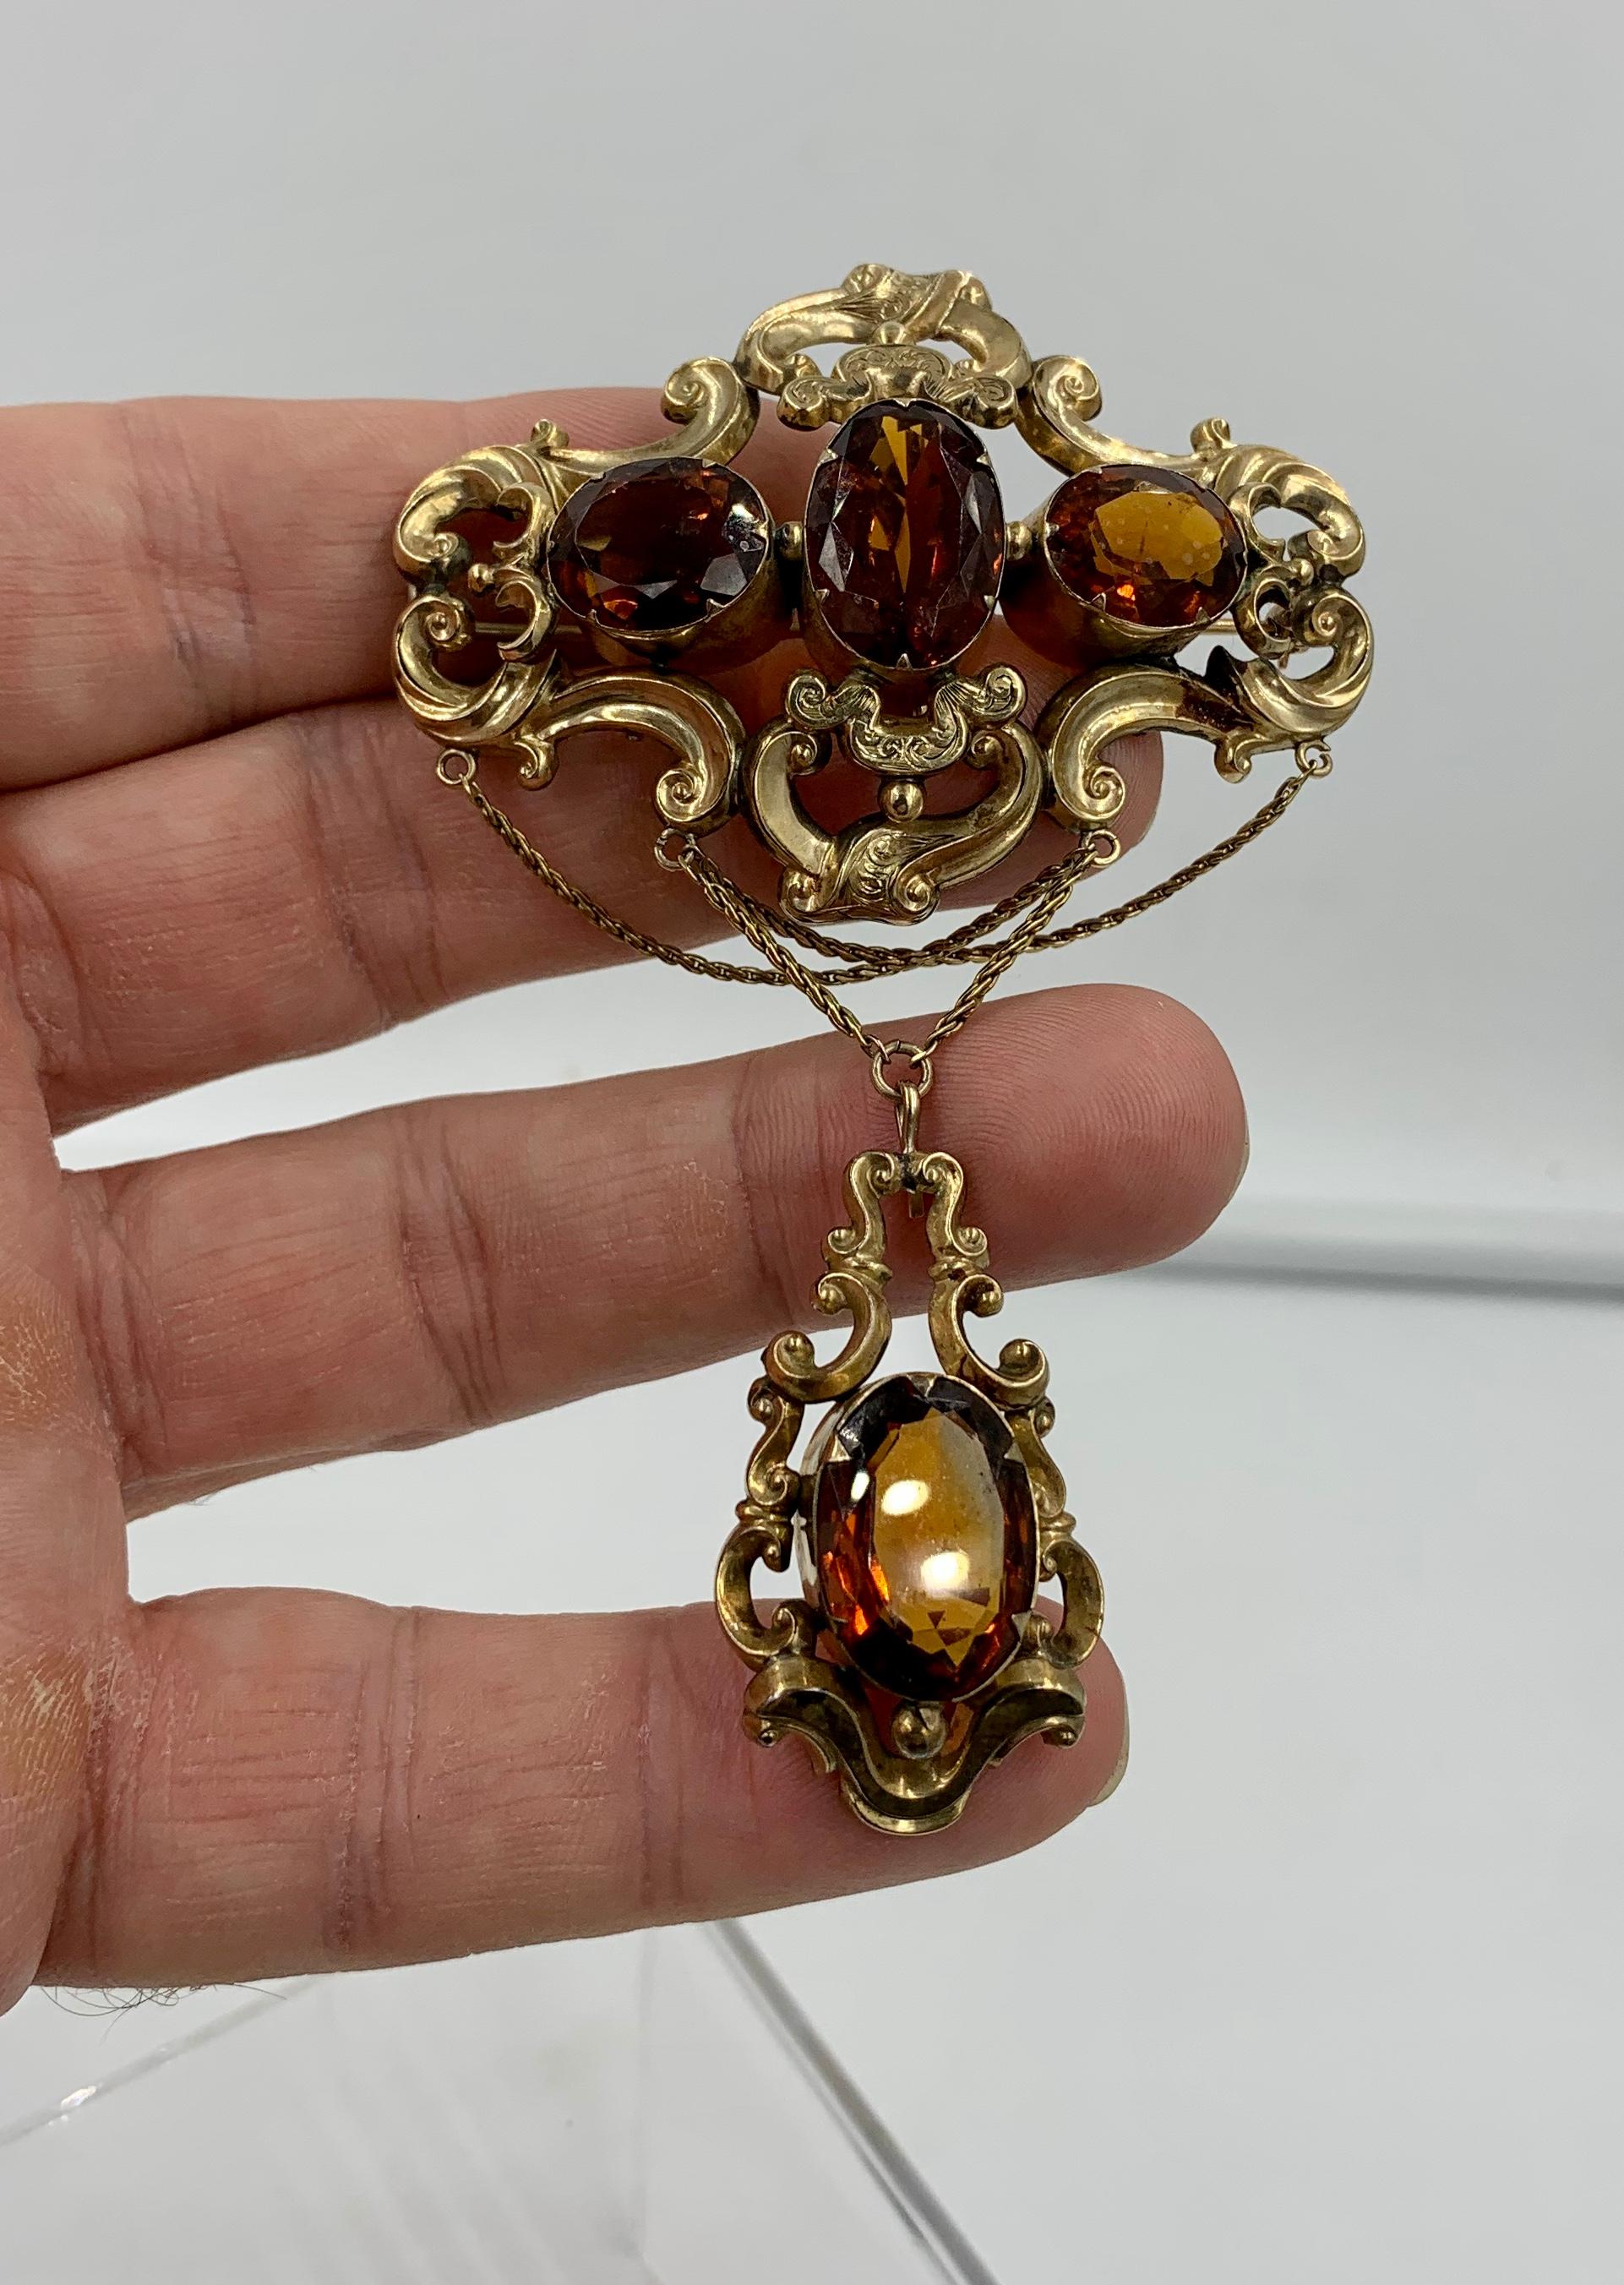 Victorian 30 Carat Citrine Swag Pendant Brooch Gold Monumental For Sale 2